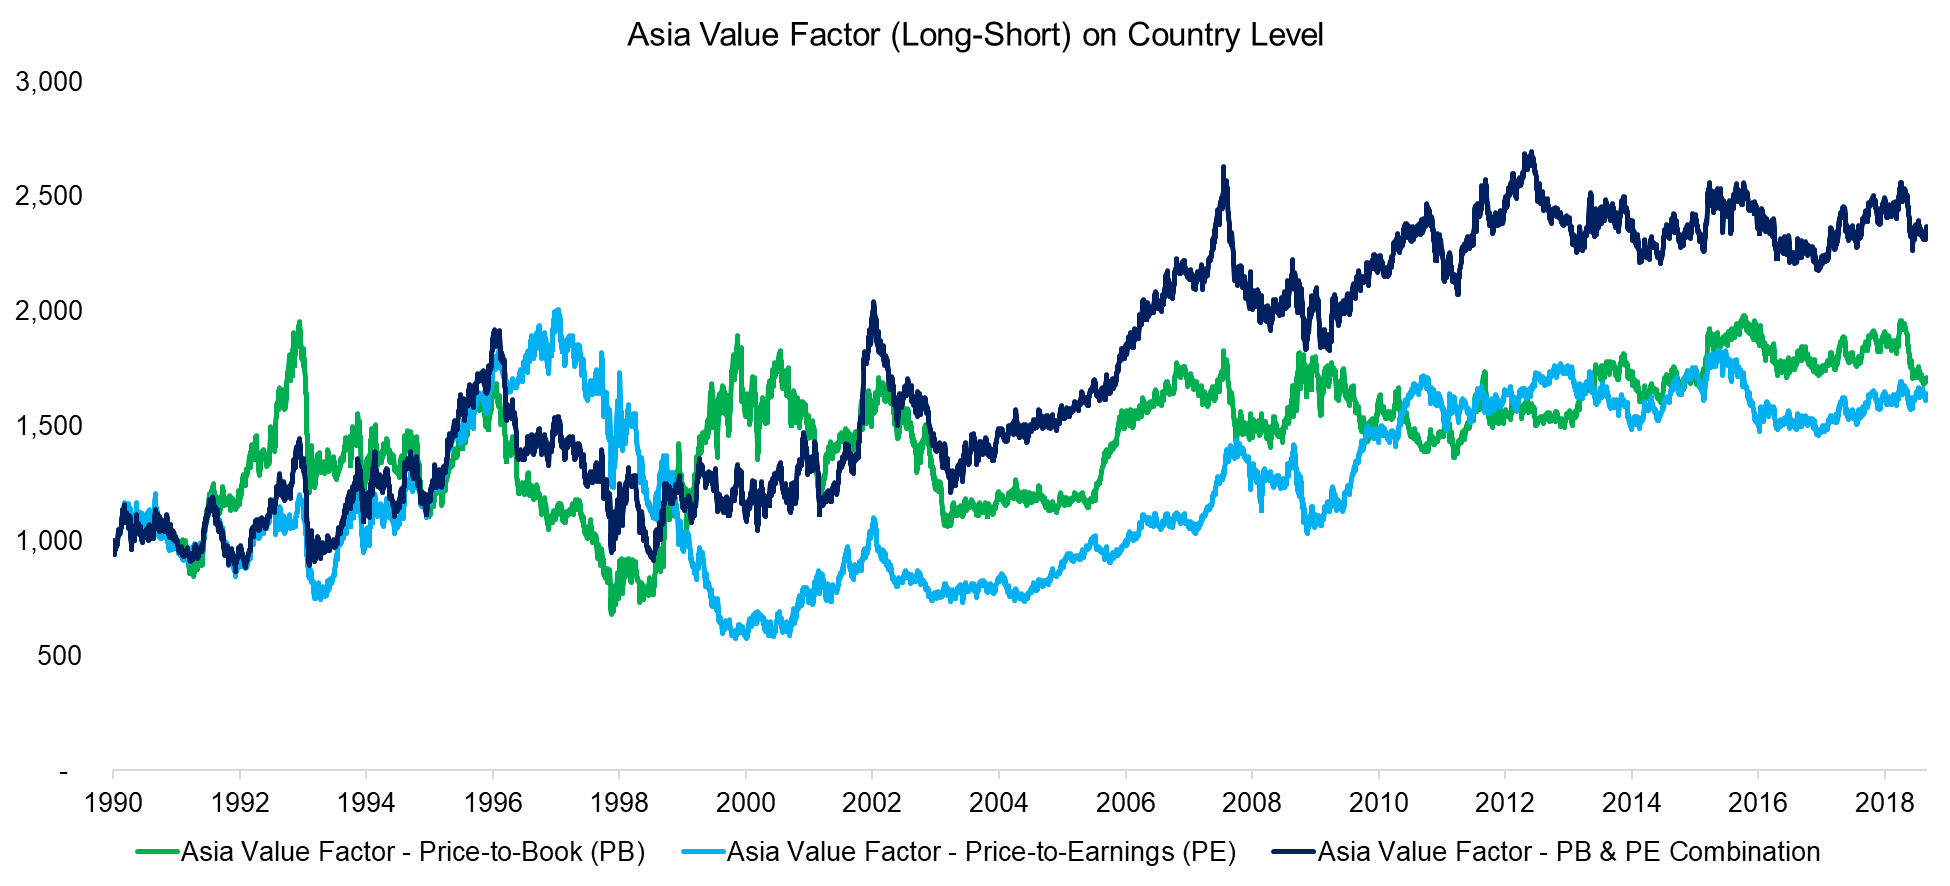 Asia Value Factor (Long-Short) on Country Level